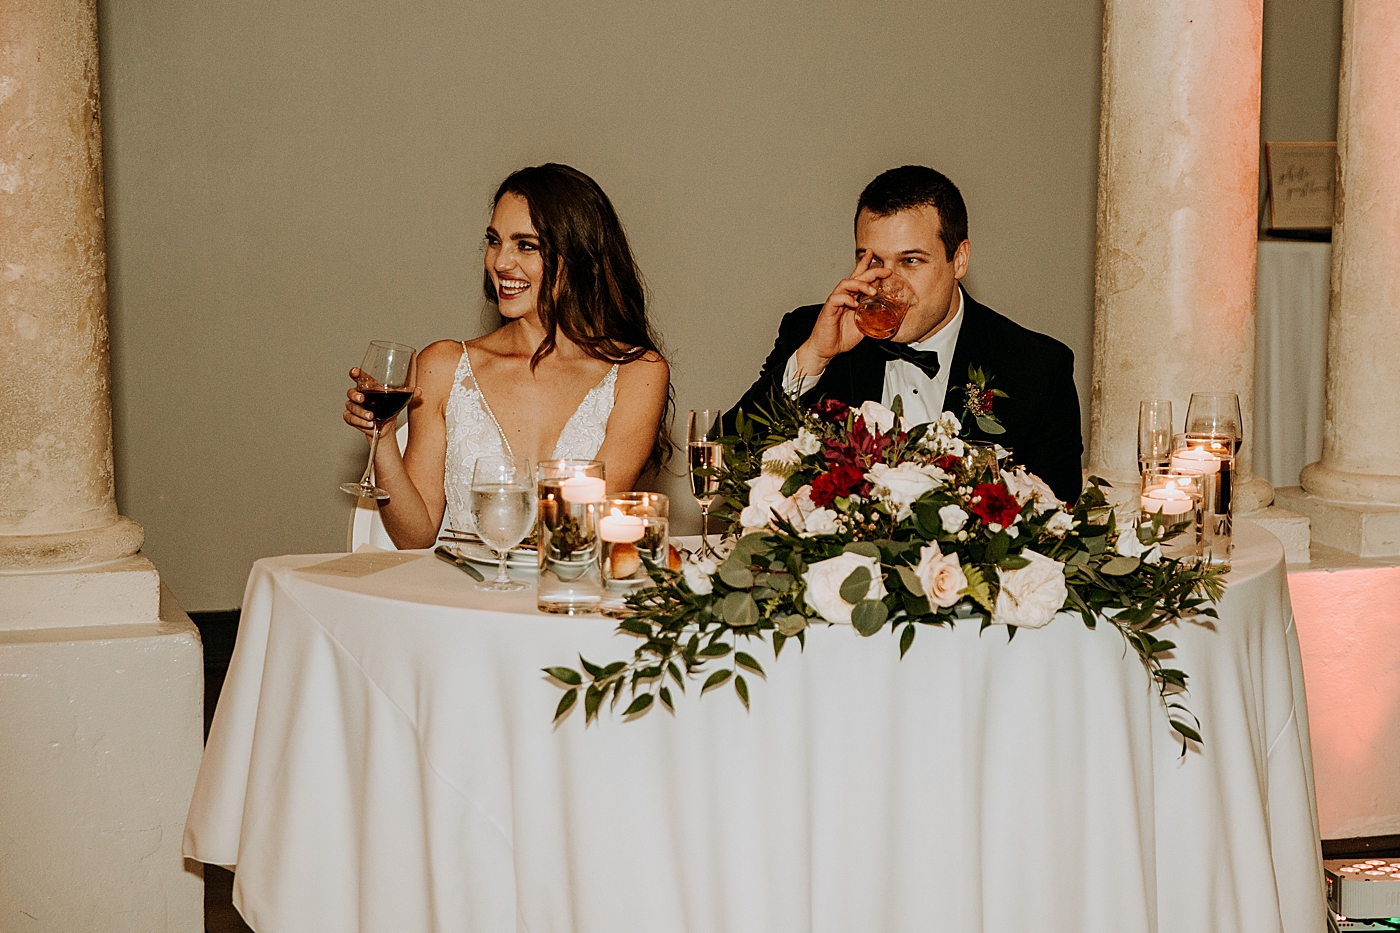 Bride and Groom at Sweetheart table having a drink Coral Gables Country Club Wedding Photography captured by South Florida Wedding Photographer Maggie Alvarez Photography